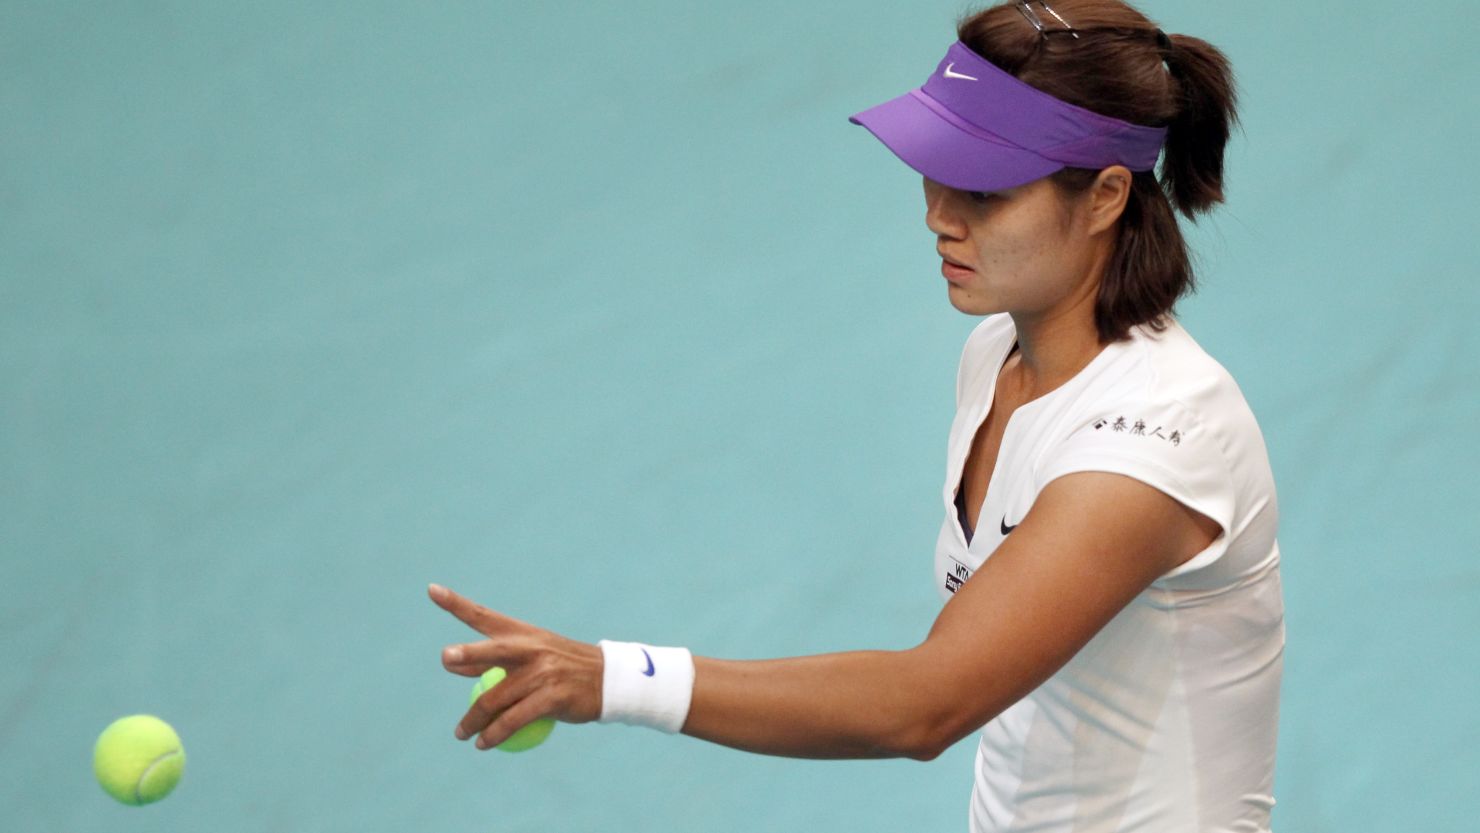 French Open champion Li Na suffered an unhappy return to Paris after injury forced her withdrawal from the indoor event